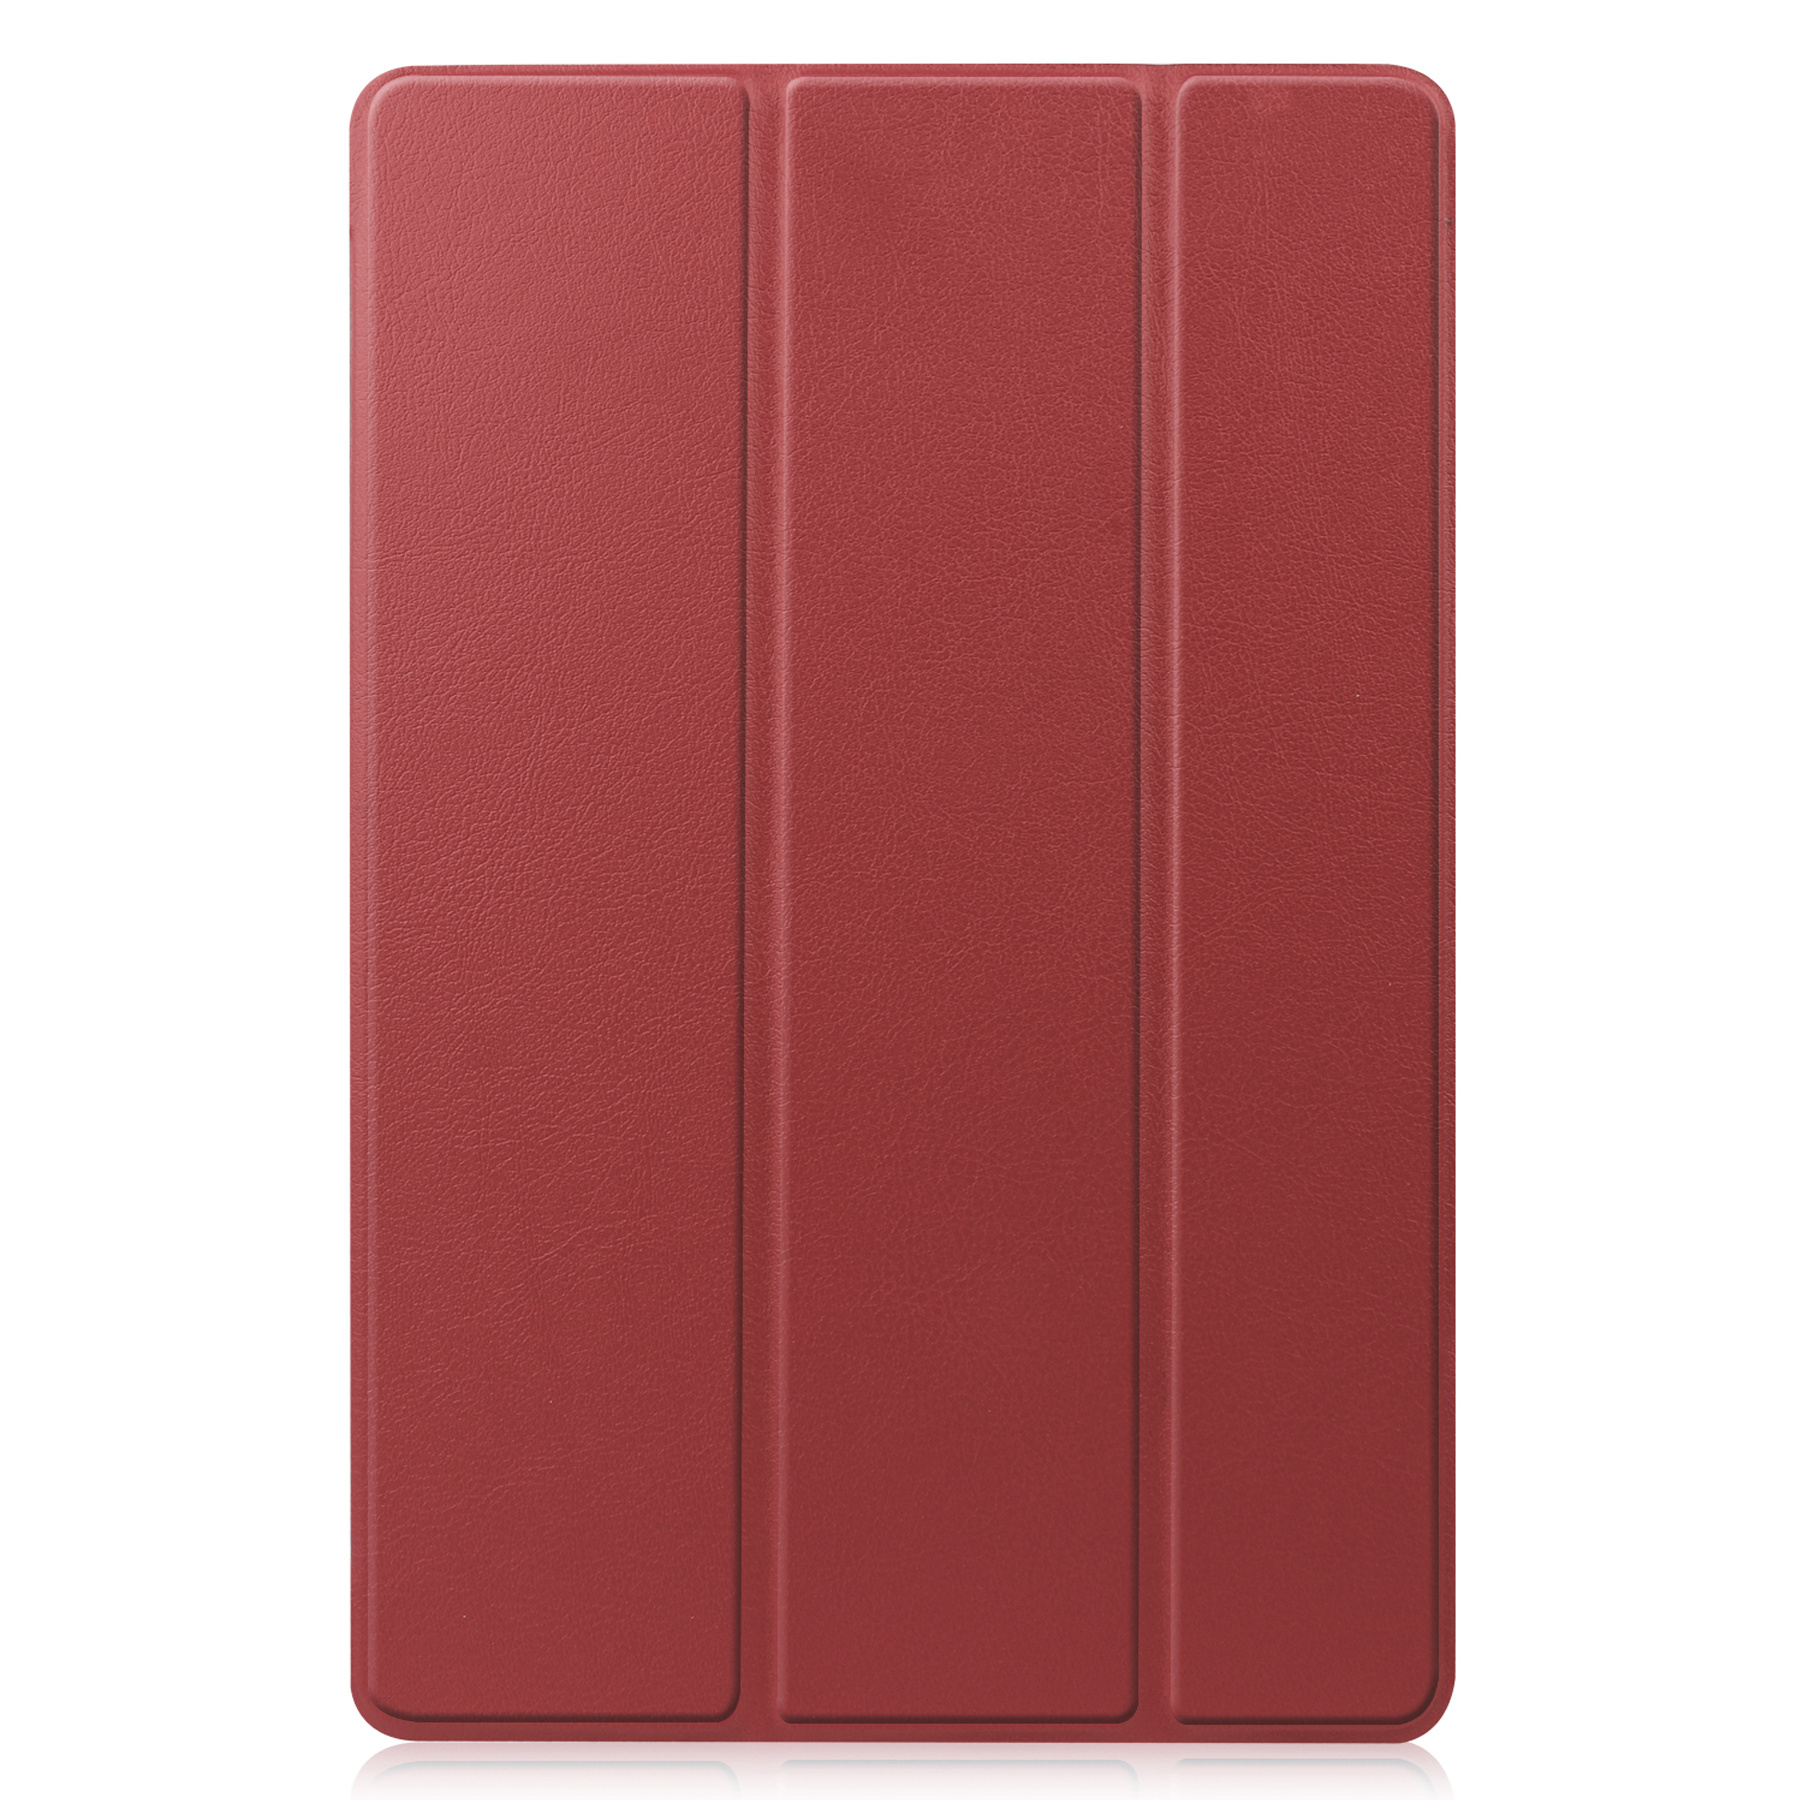 Nomfy Samsung Galaxy Tab S8 Plus Hoesje 12,4 inch Case Donker Rood - Samsung Galaxy Tab S8 Plus Hoes Hardcover Hoesje Bookcase Met Uitsparing S Pen - Donker Rood